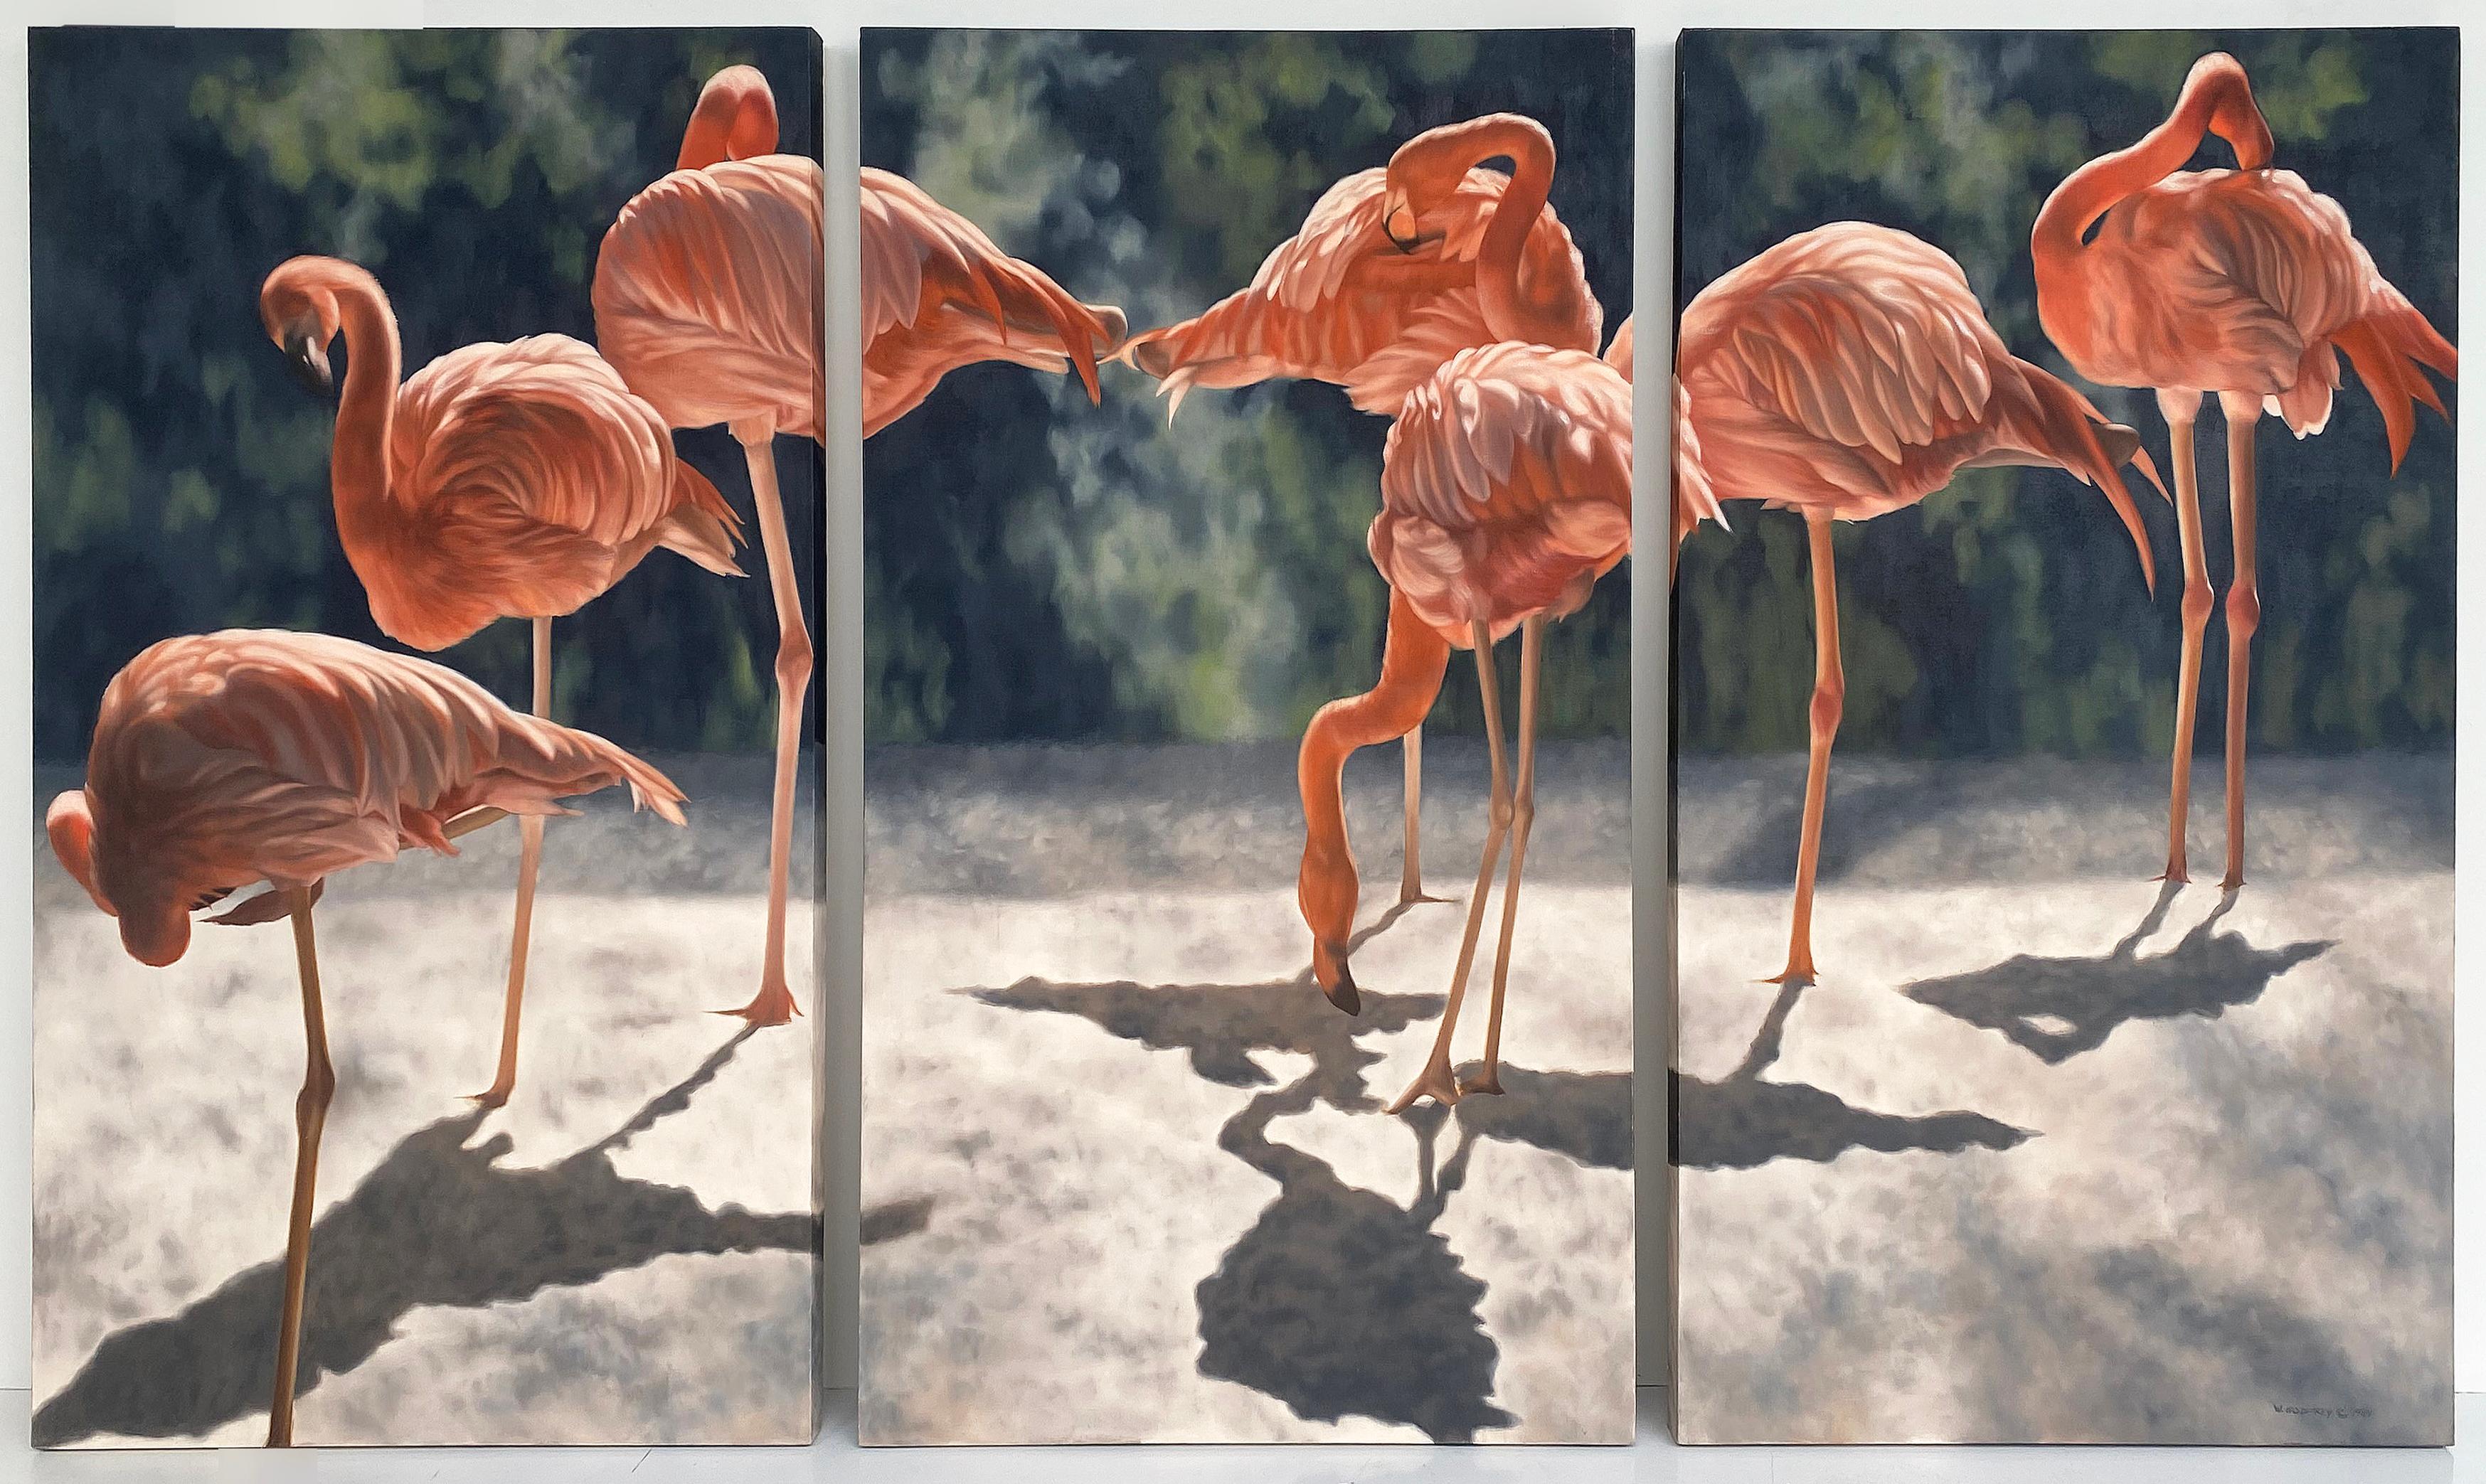 Monumental Winifred Godfrey Triptych Paintings Oil on Canvas 

Offered for sale is a monumental and striking flamingo triptych oil painting group by the American artist Winifred Godfrey (1944- ). The paintings are on canvas and are notated on the